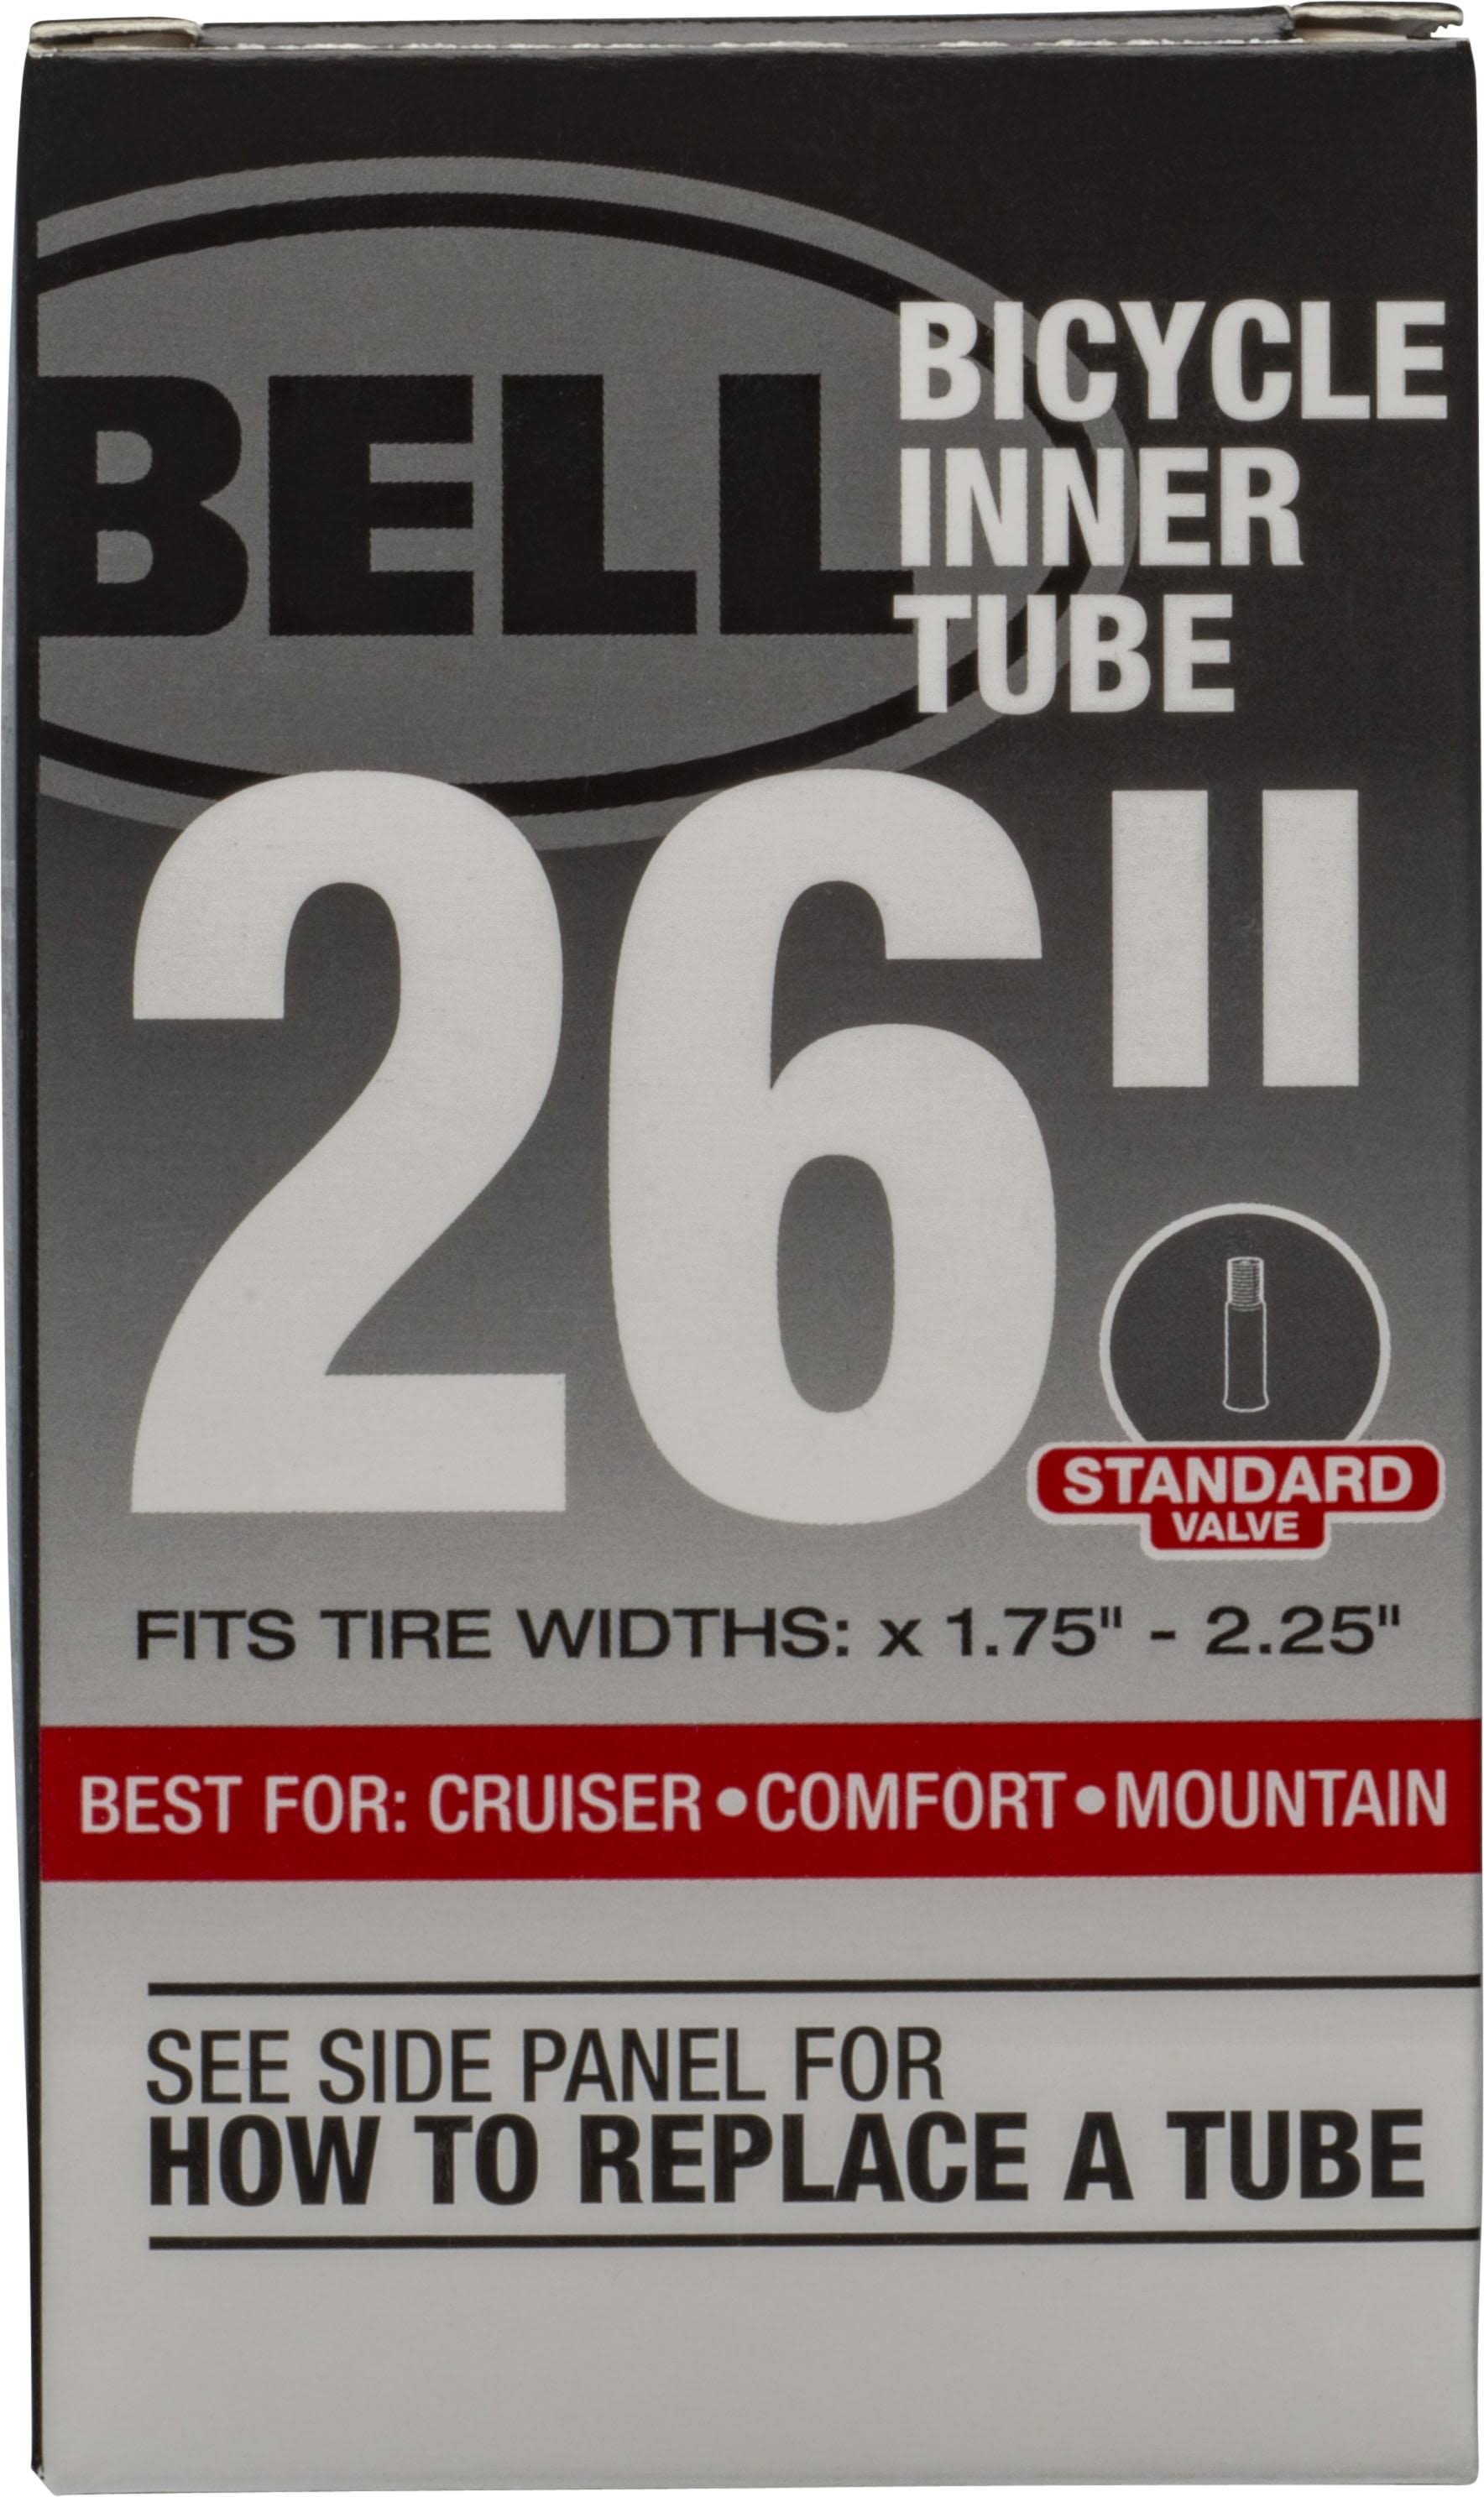 Bell Universal Bicycle Inner Tube - 26"